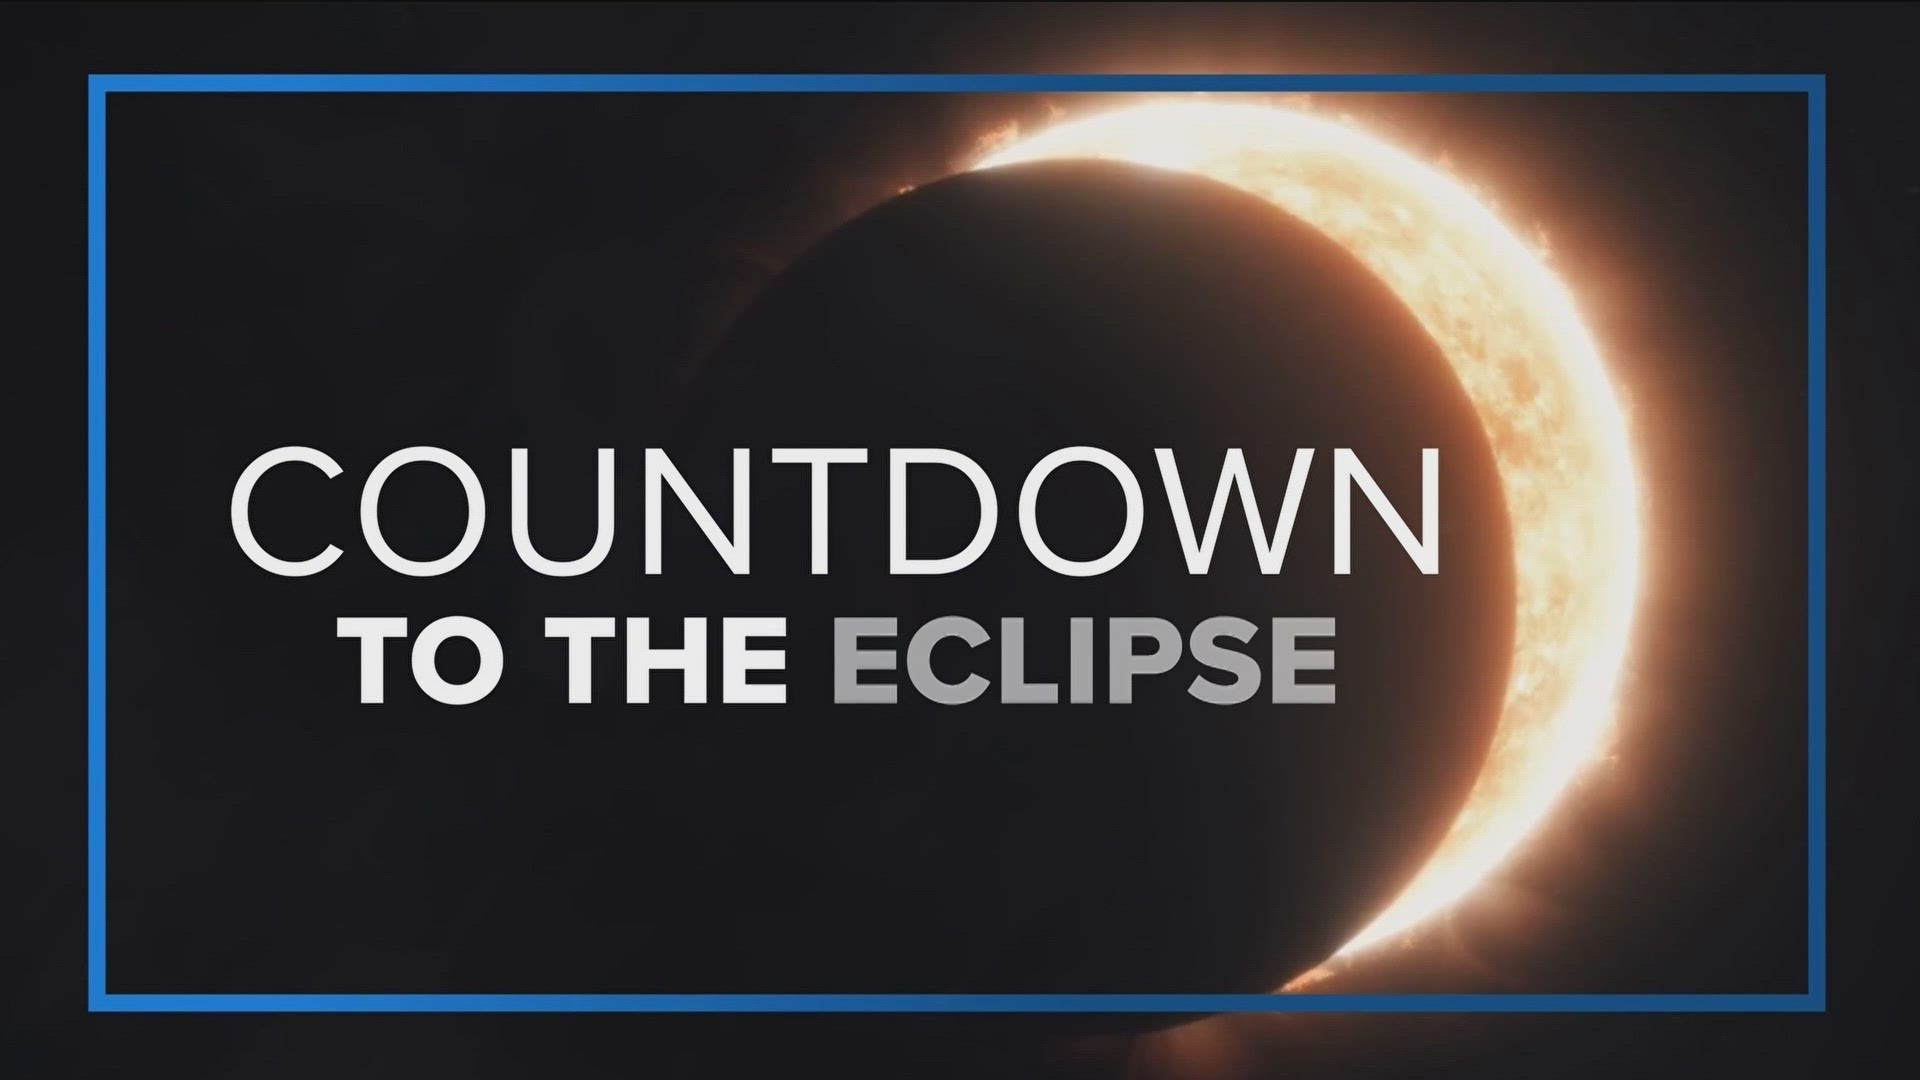 Joe talks with Guy Raz and Mindy Thomas about how you can celebrate the eclipse while also answering any questions kids may have!